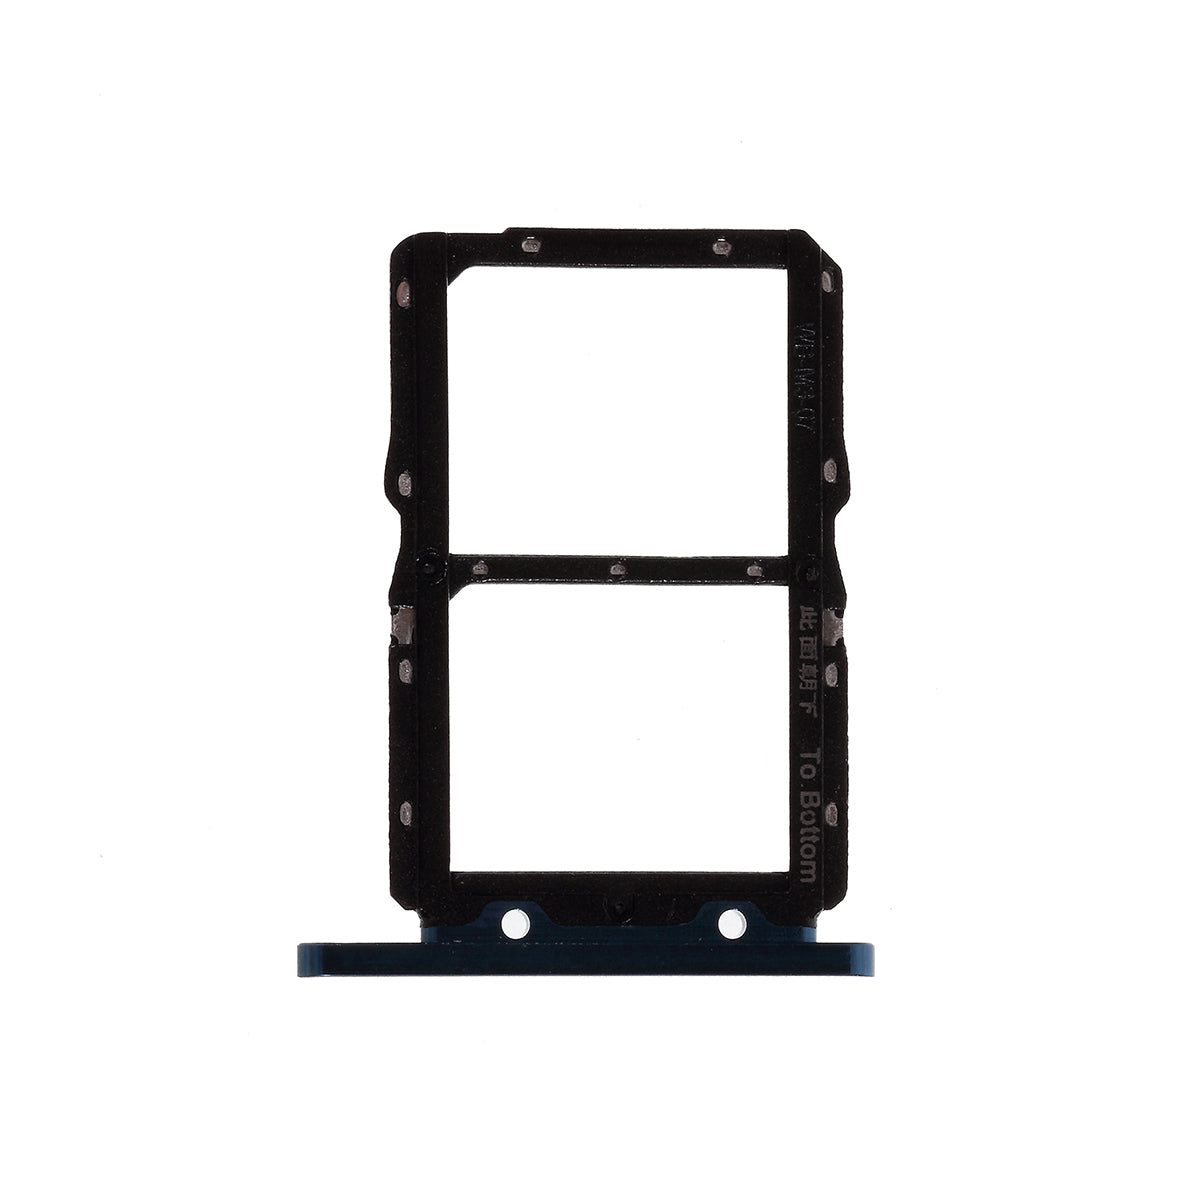 For Huawei Honor 20 / Nova 5T YAL-L21 OEM Dual SIM Card Tray Holder Replace Part (without Logo) - Dark Blue